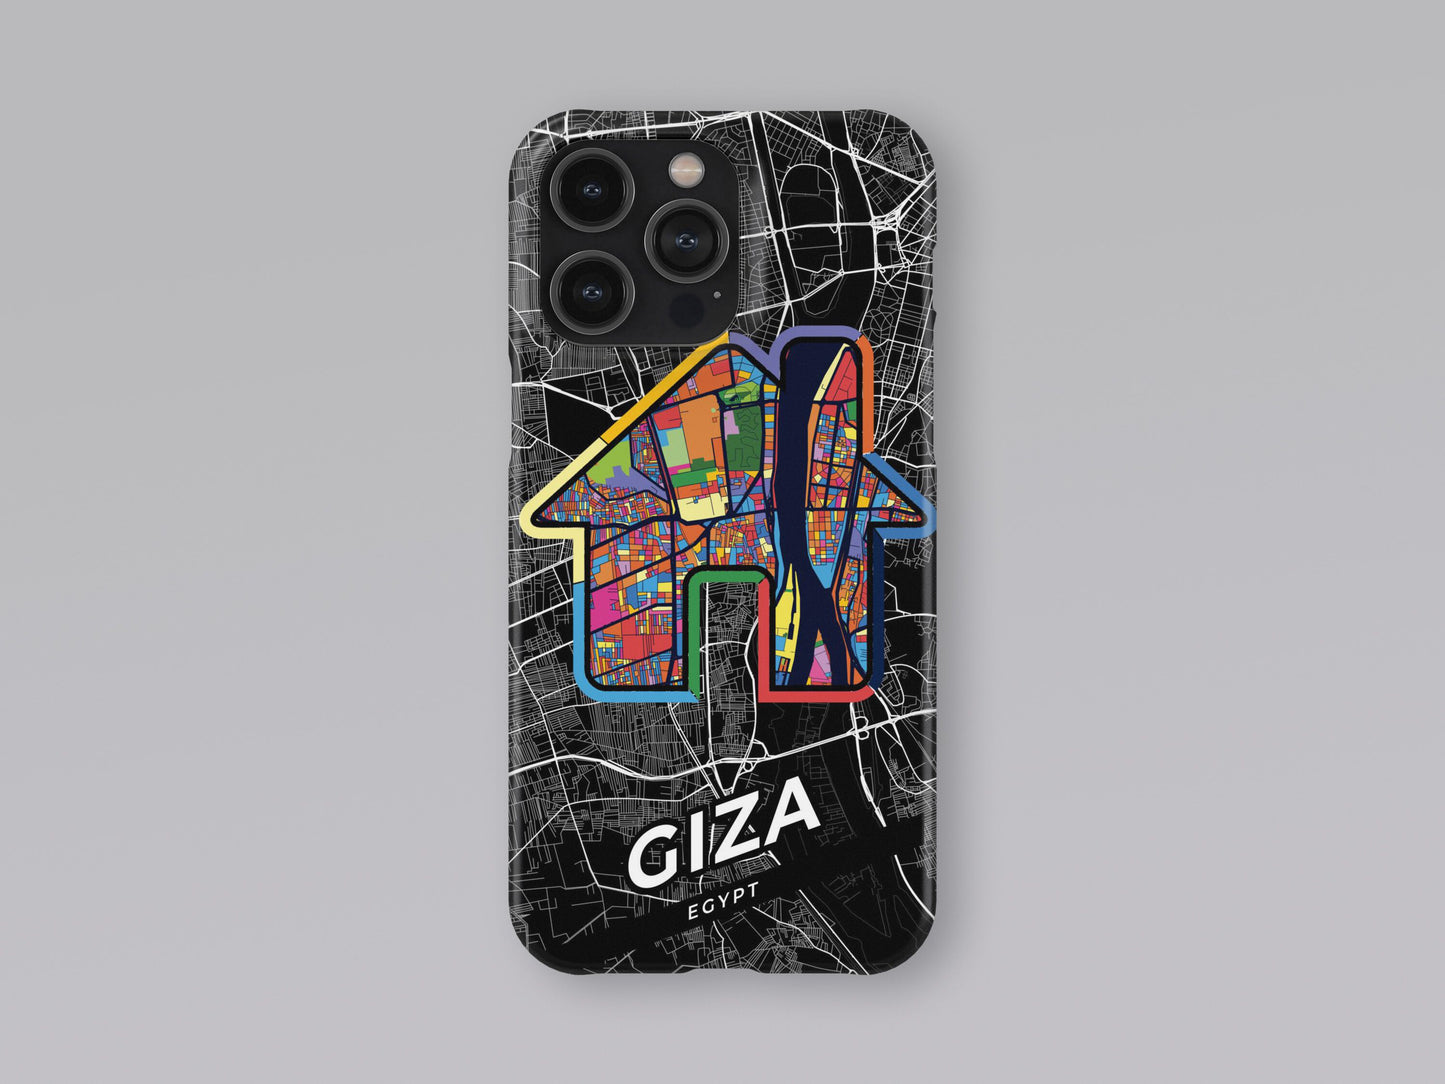 Giza Egypt slim phone case with colorful icon. Birthday, wedding or housewarming gift. Couple match cases. 3